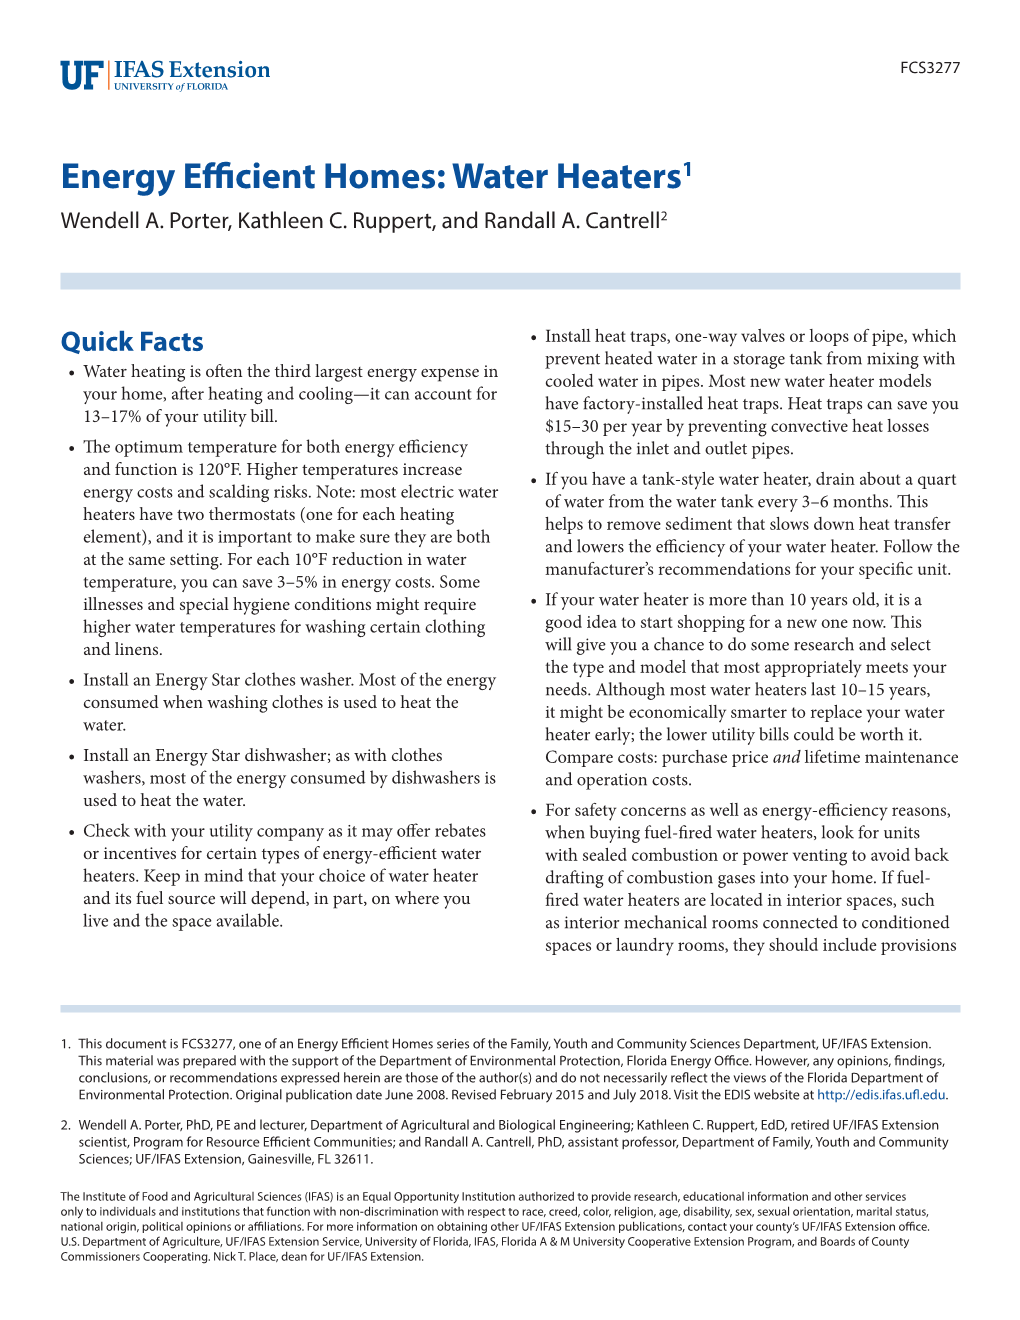 Energy Efficient Homes: Water Heaters1 Wendell A